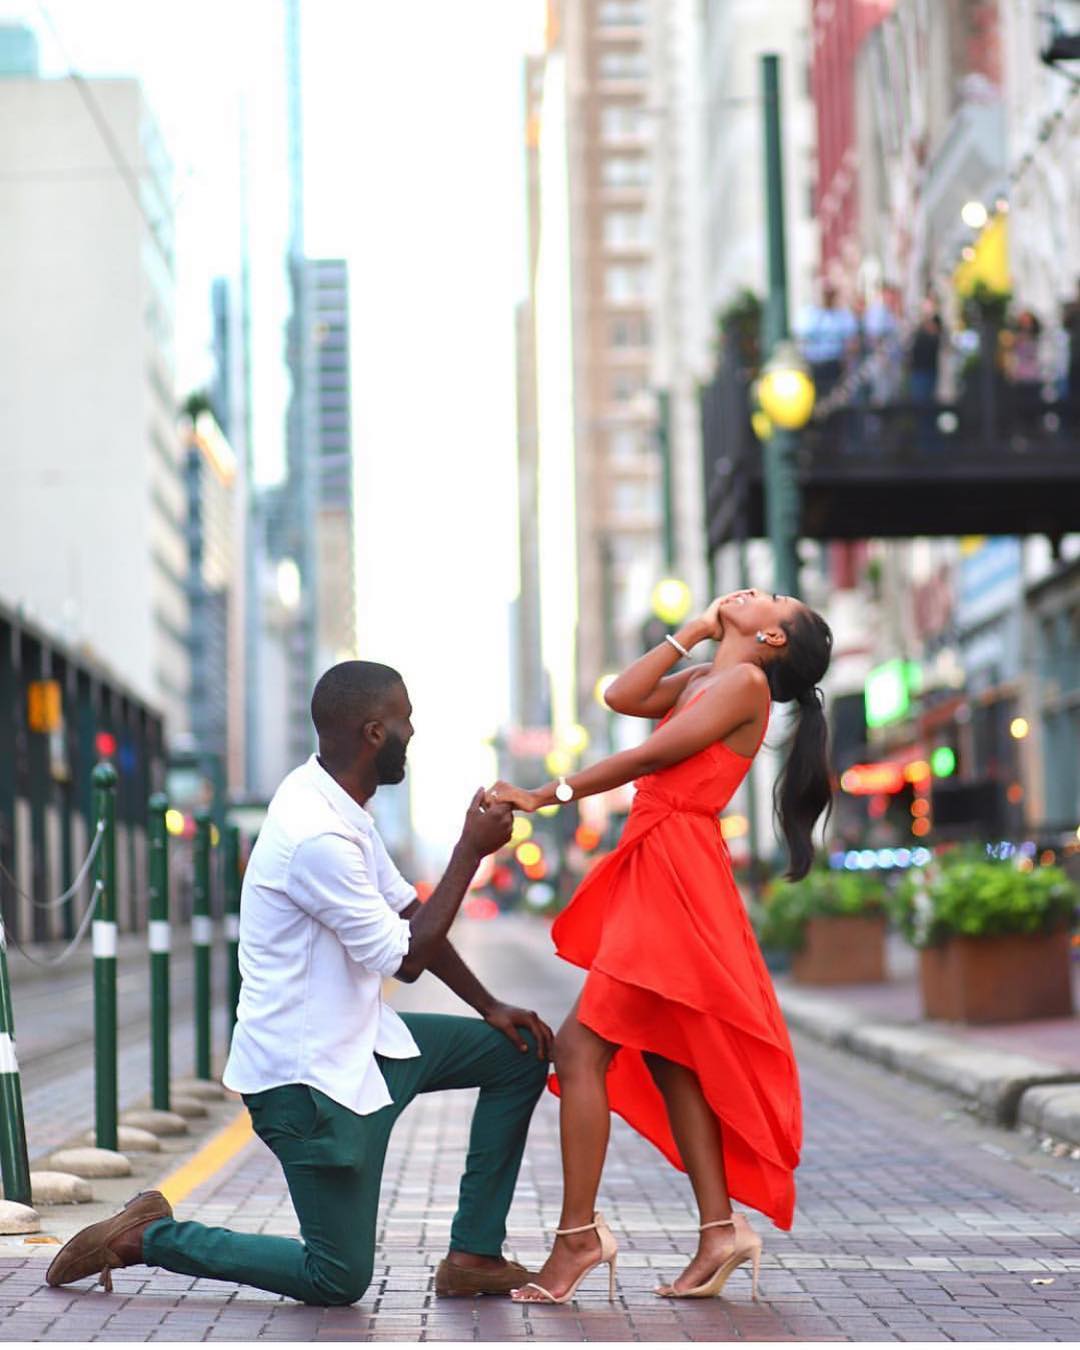 Wedding Proposal Ideas That Will Make Your Partner Swoon